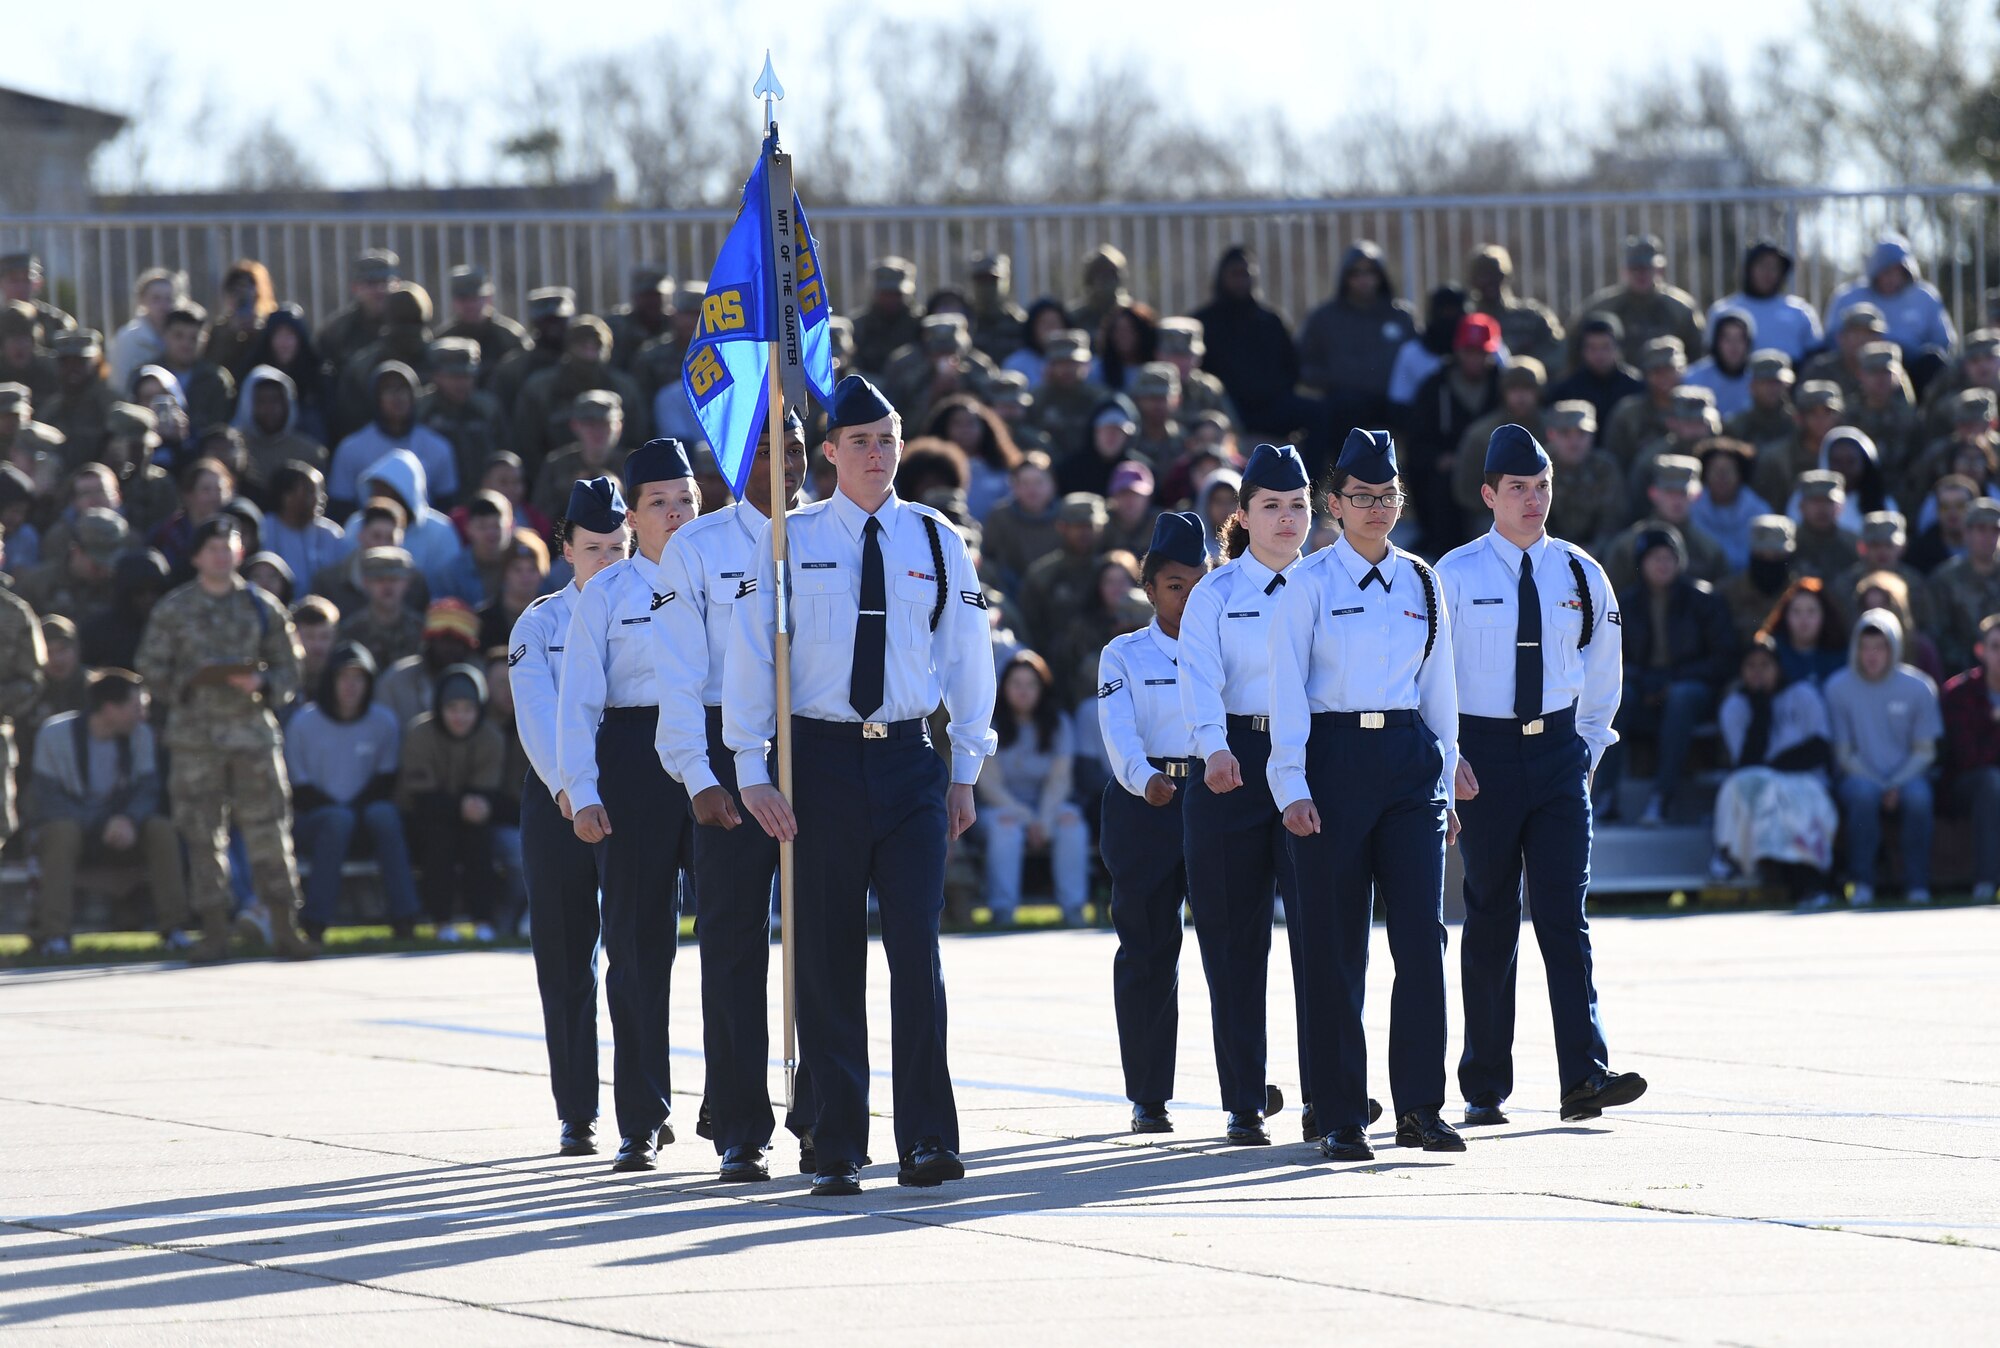 Members of the 334th Training Squadron regulation drill team perform during the 81st Training Group drill down on the Levitow Training Support Facility drill pad at Keesler Air Force Base, Mississippi, Feb. 23, 2023.